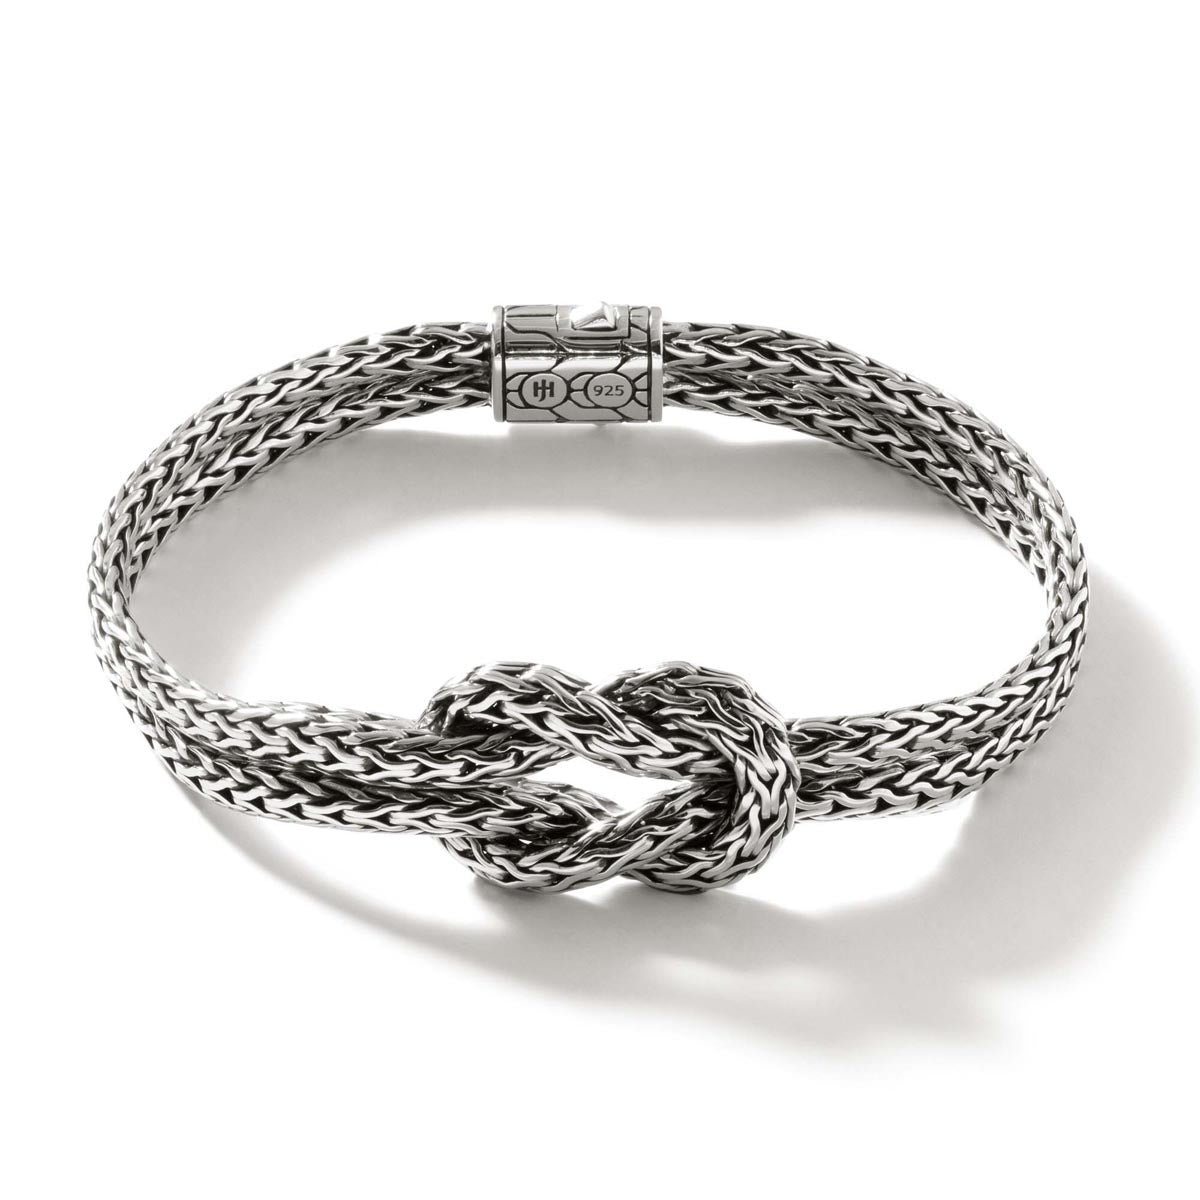 Classic Bracelet - Get Best Price from Manufacturers & Suppliers in India